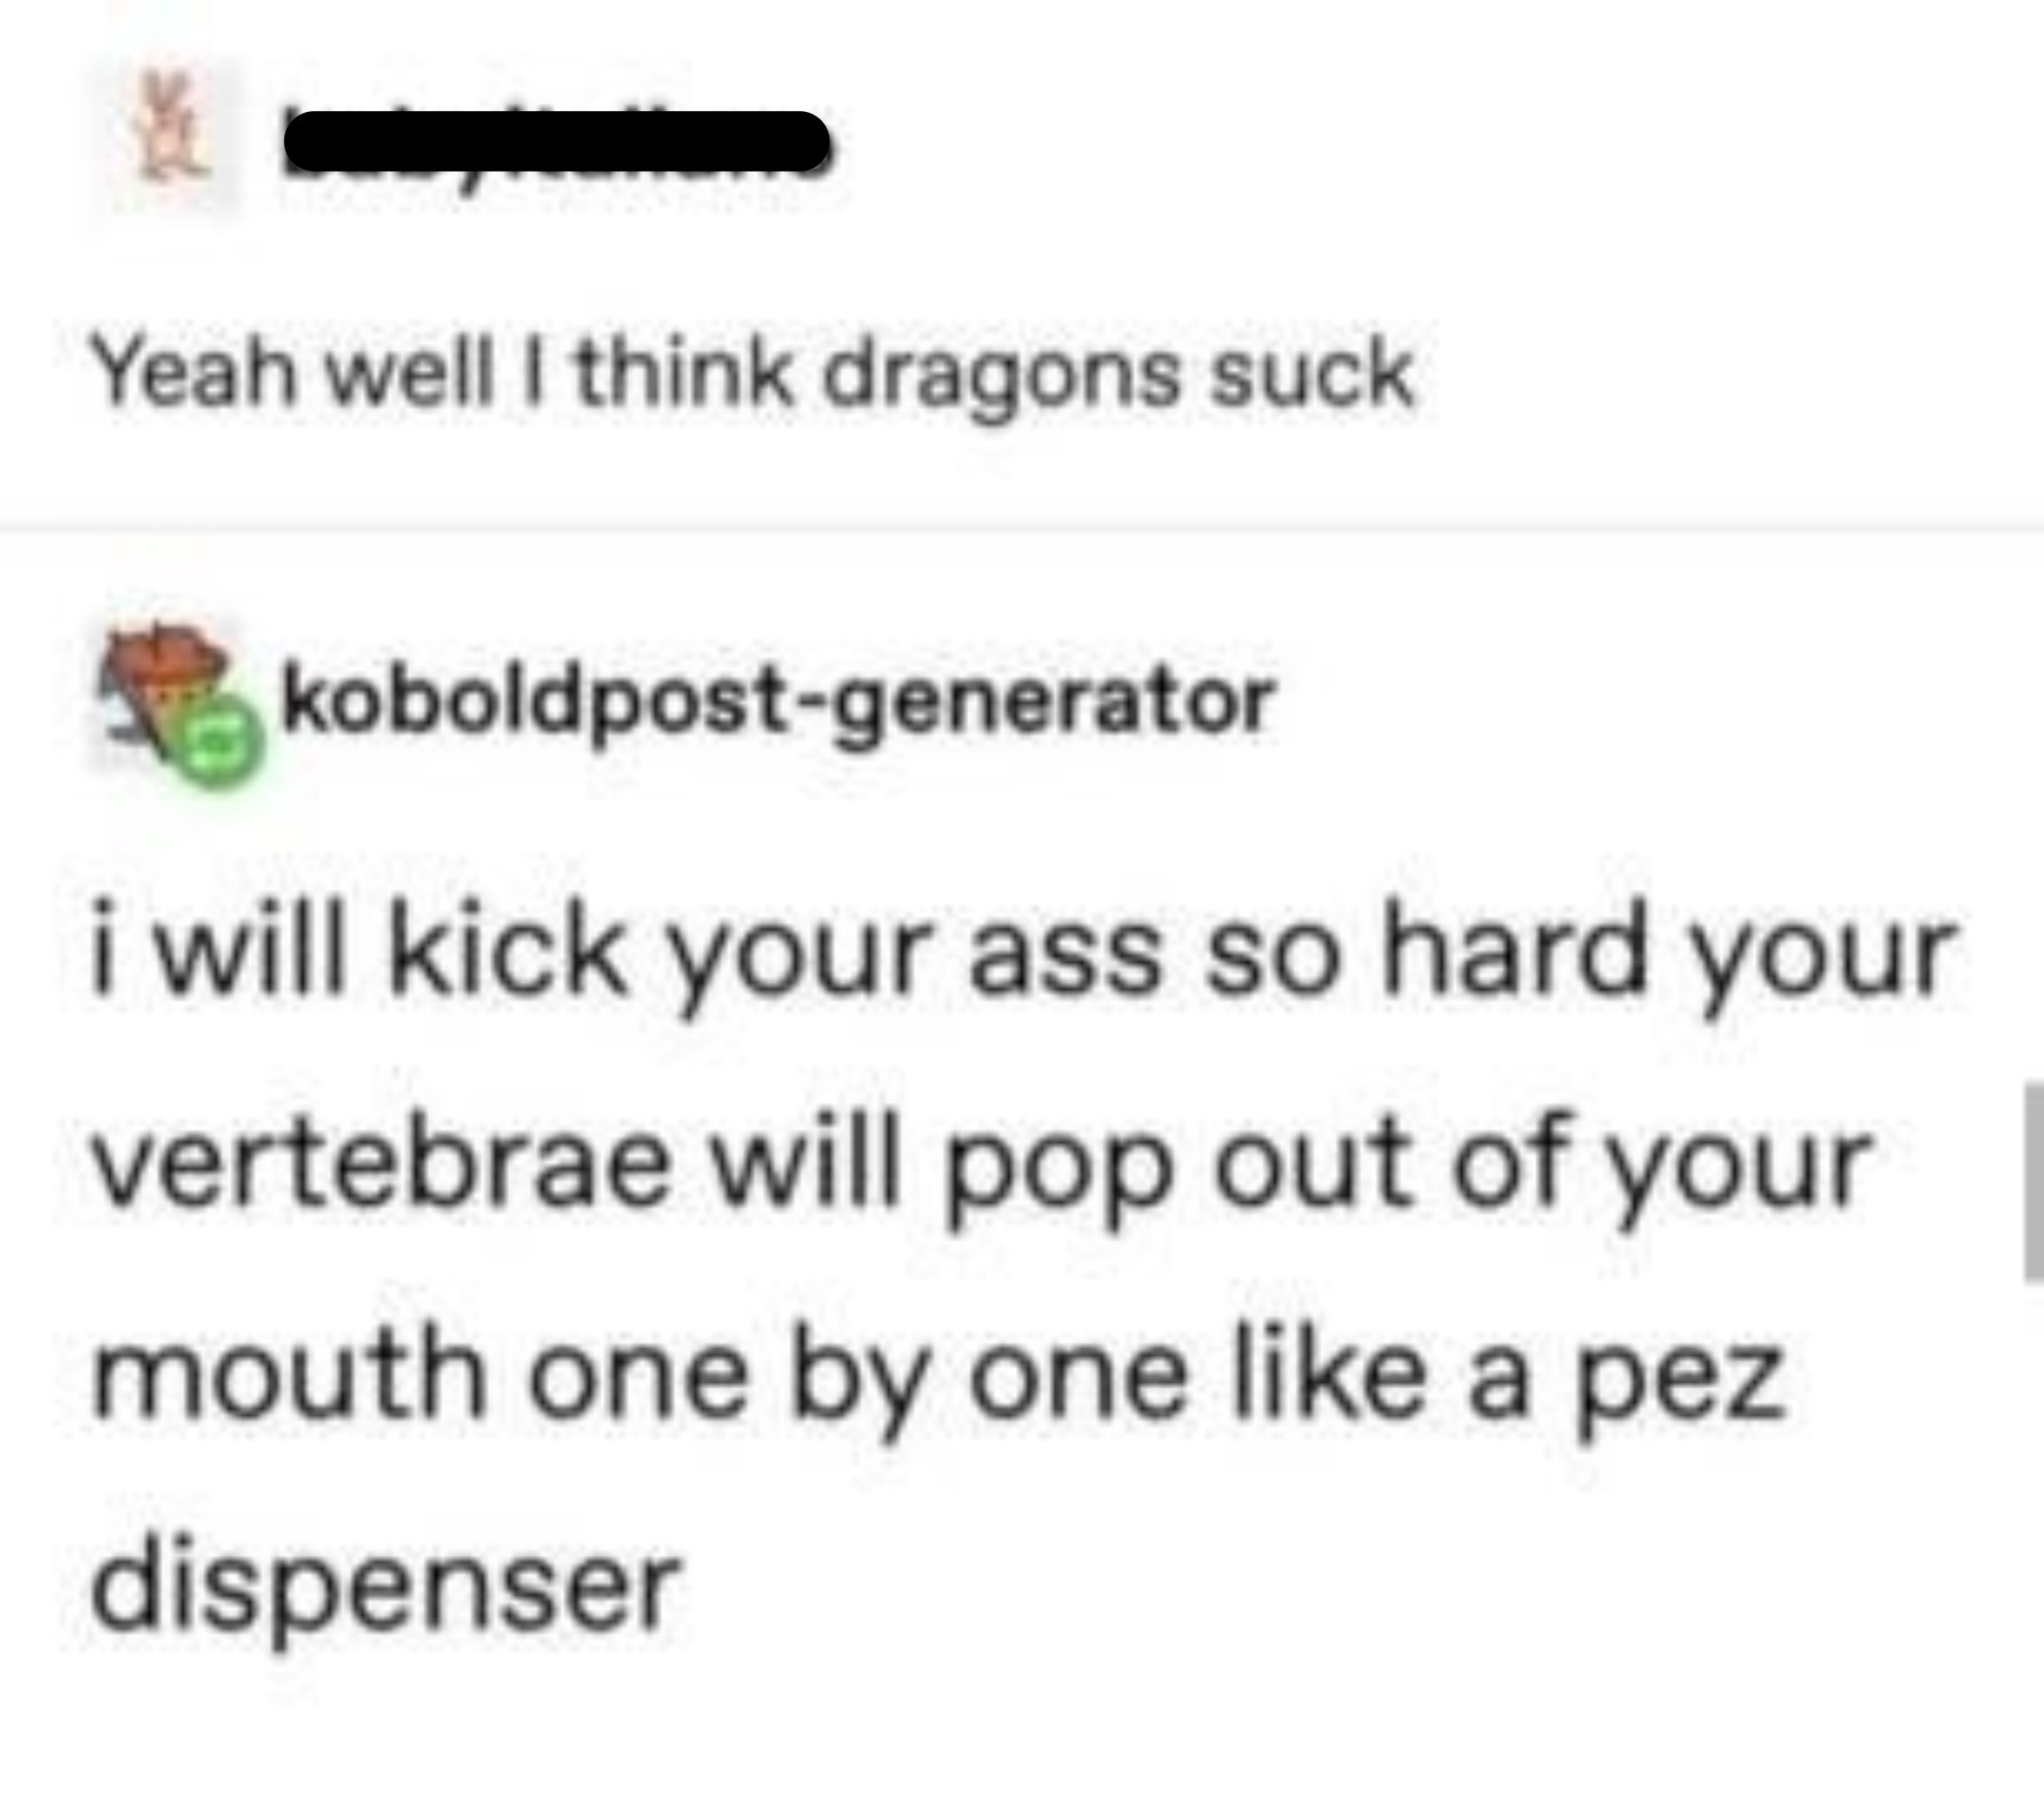 person who says dragons aren&#x27;t cool and someone says i will kick your ass so hard your vertebrae will pop out like a pez dispenser: